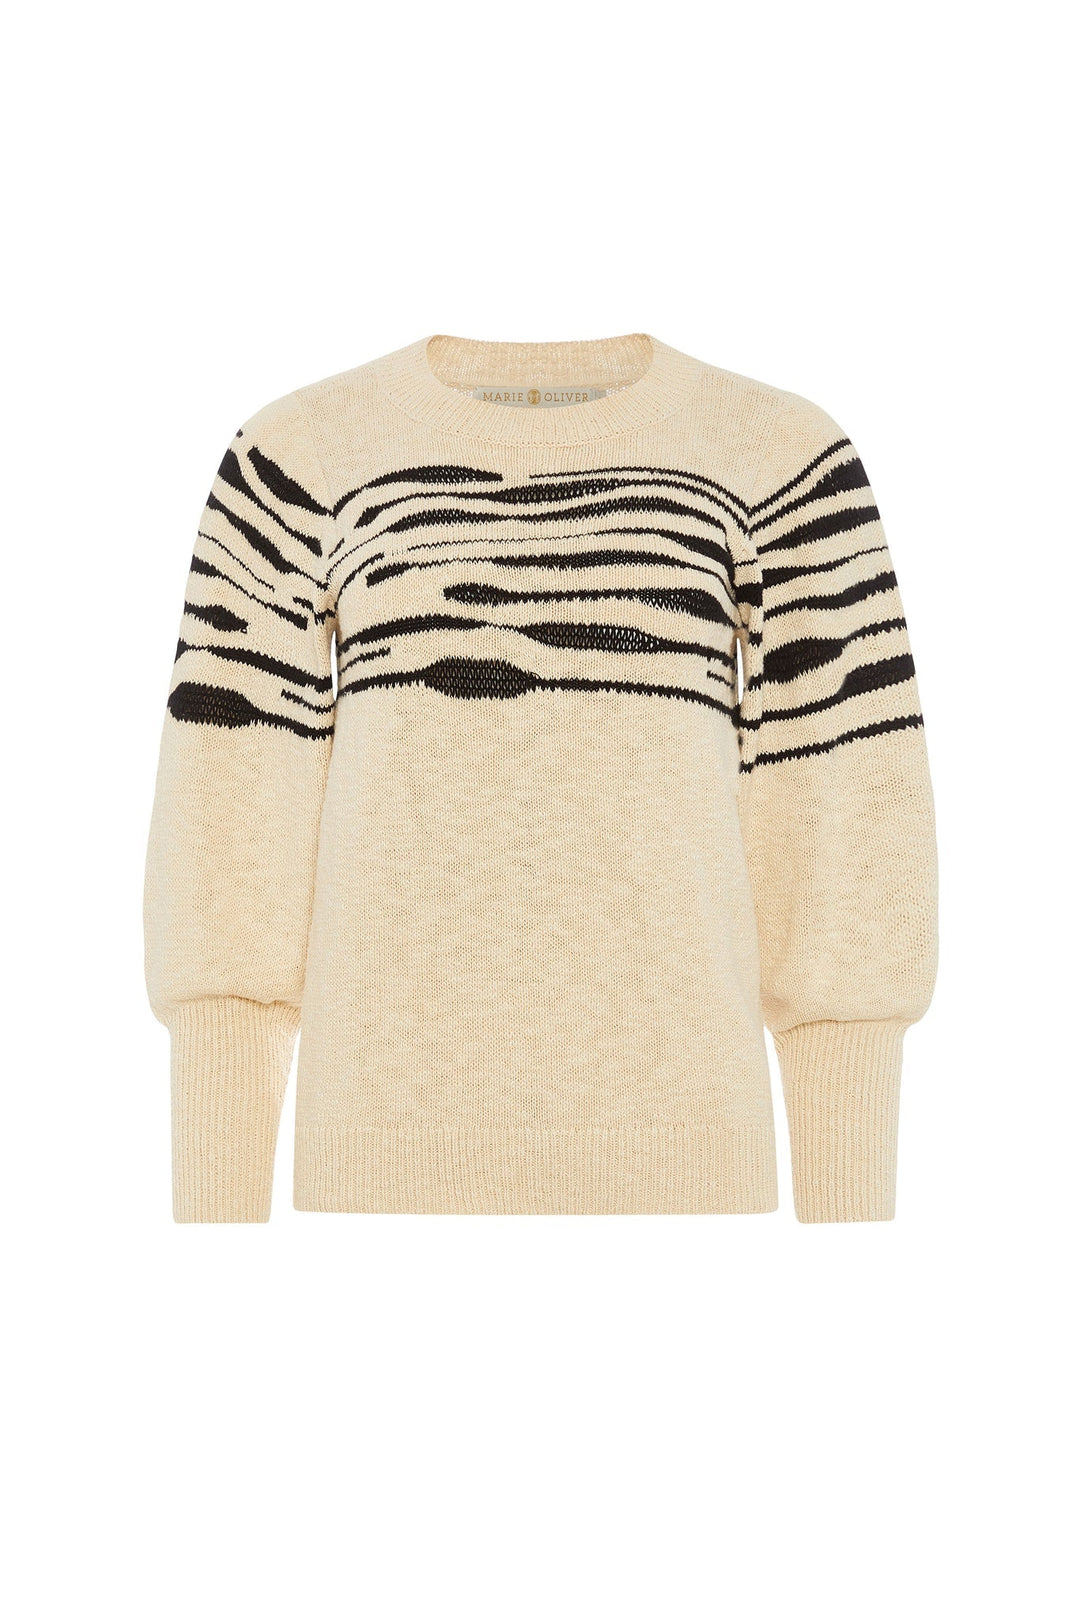 Marie Oliver - Oriana L/S Sweater: Ivory/Black - Shorely Chic Boutique